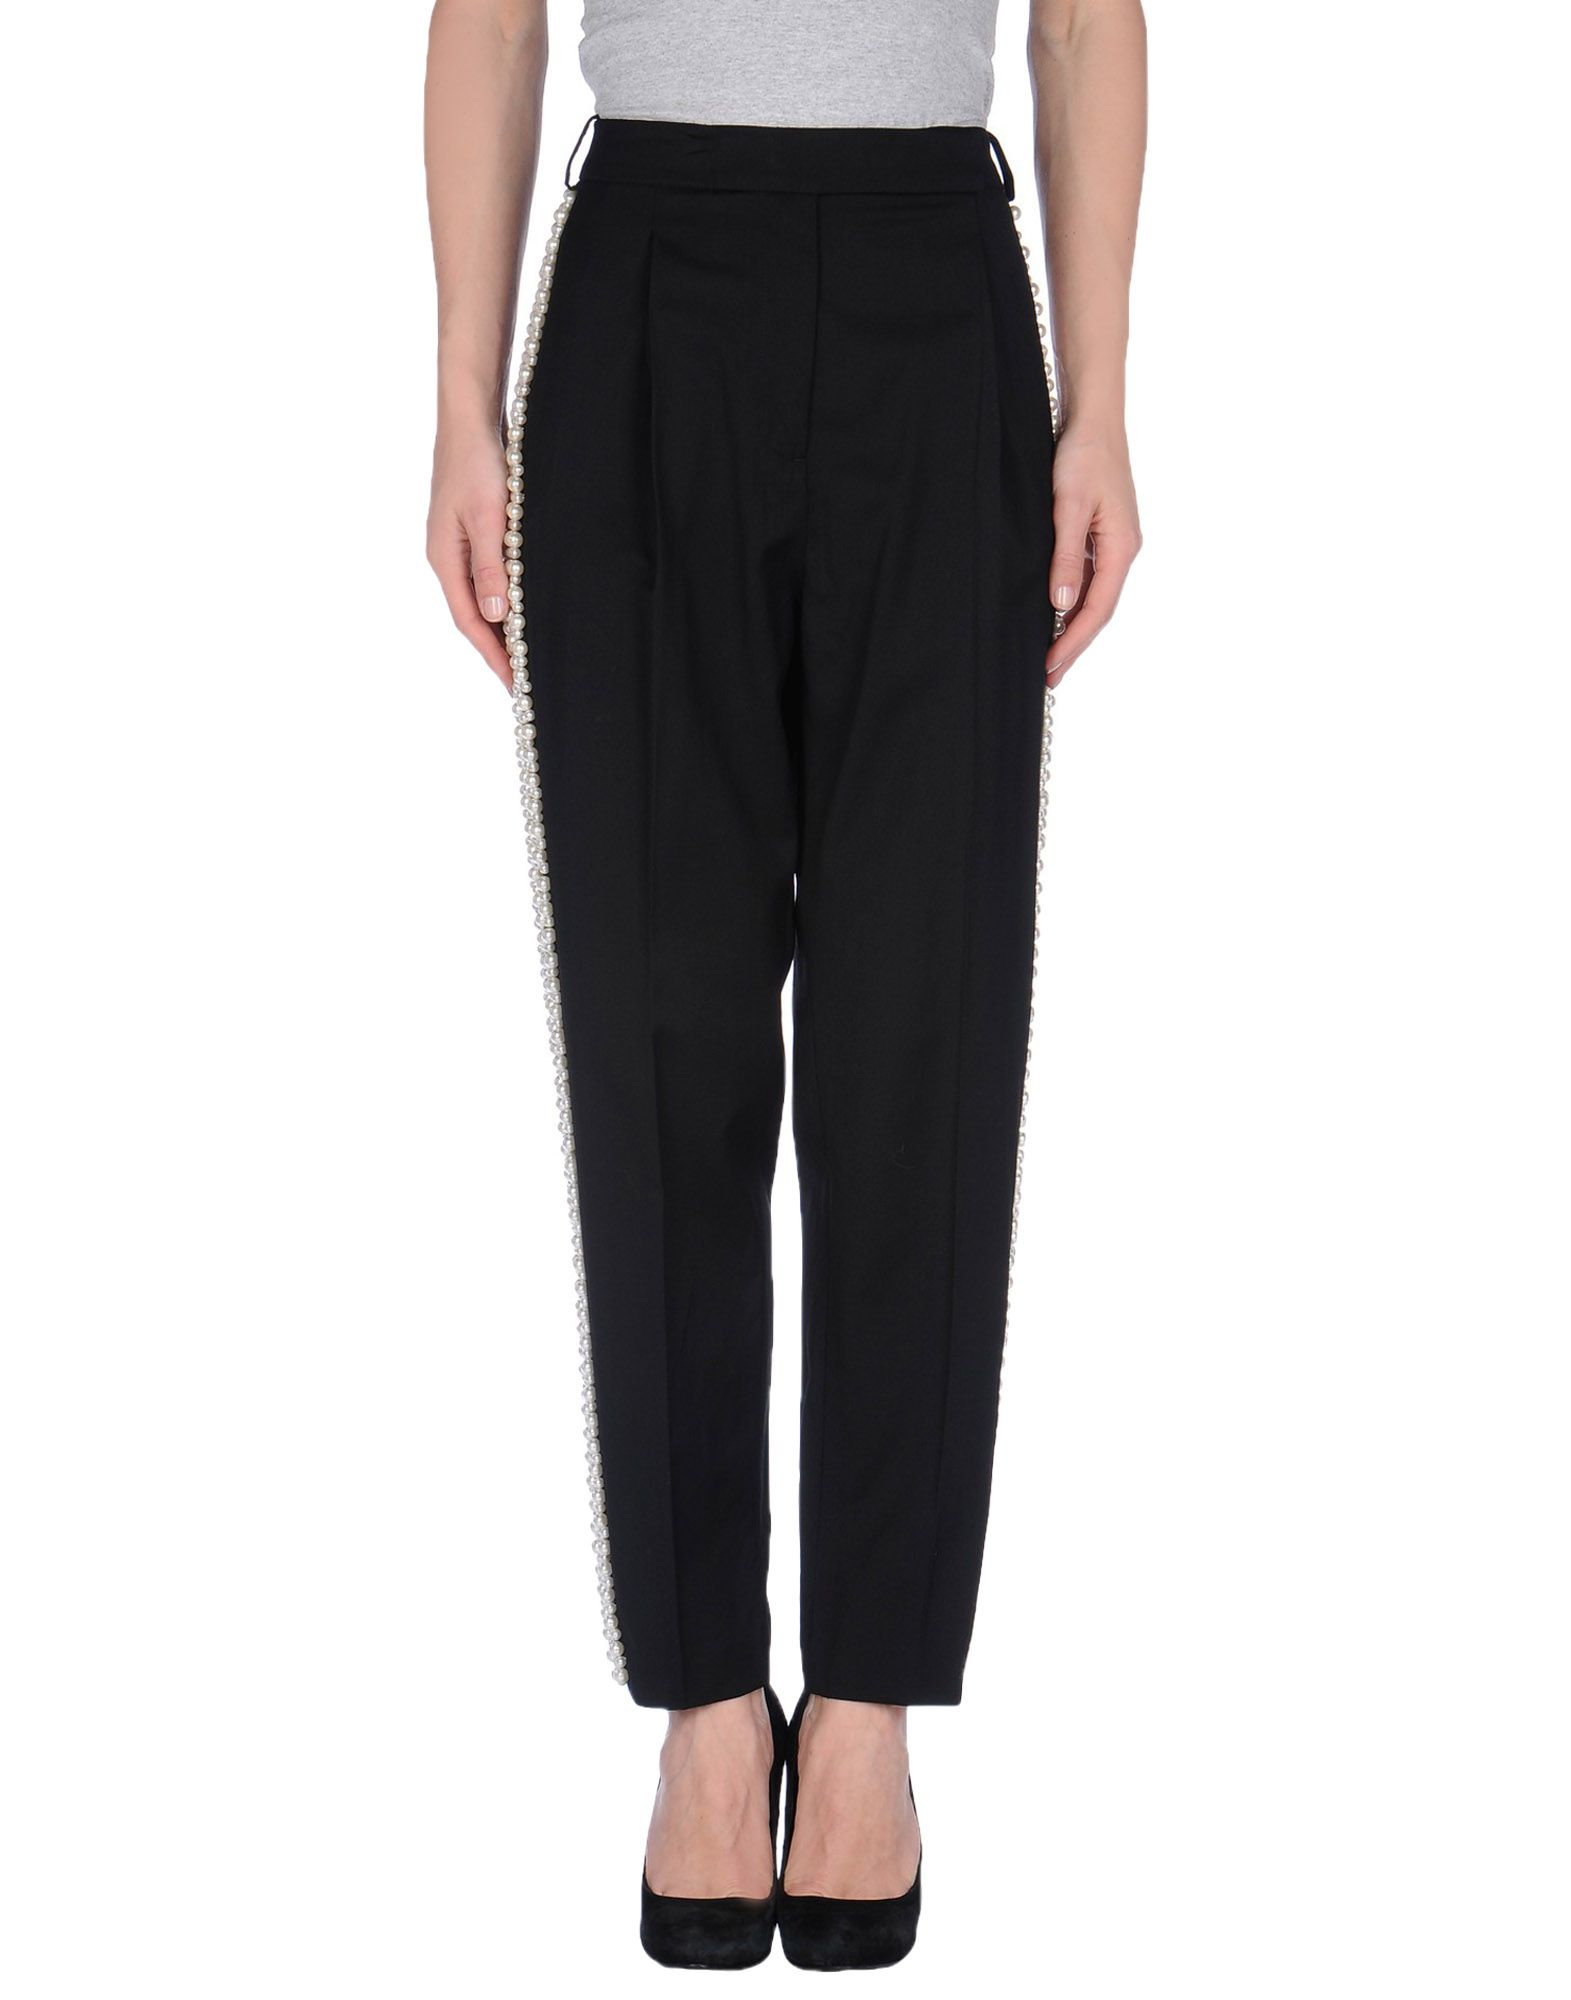 Golden Goose Deluxe Brand Synthetic Casual Pants in Black - Lyst